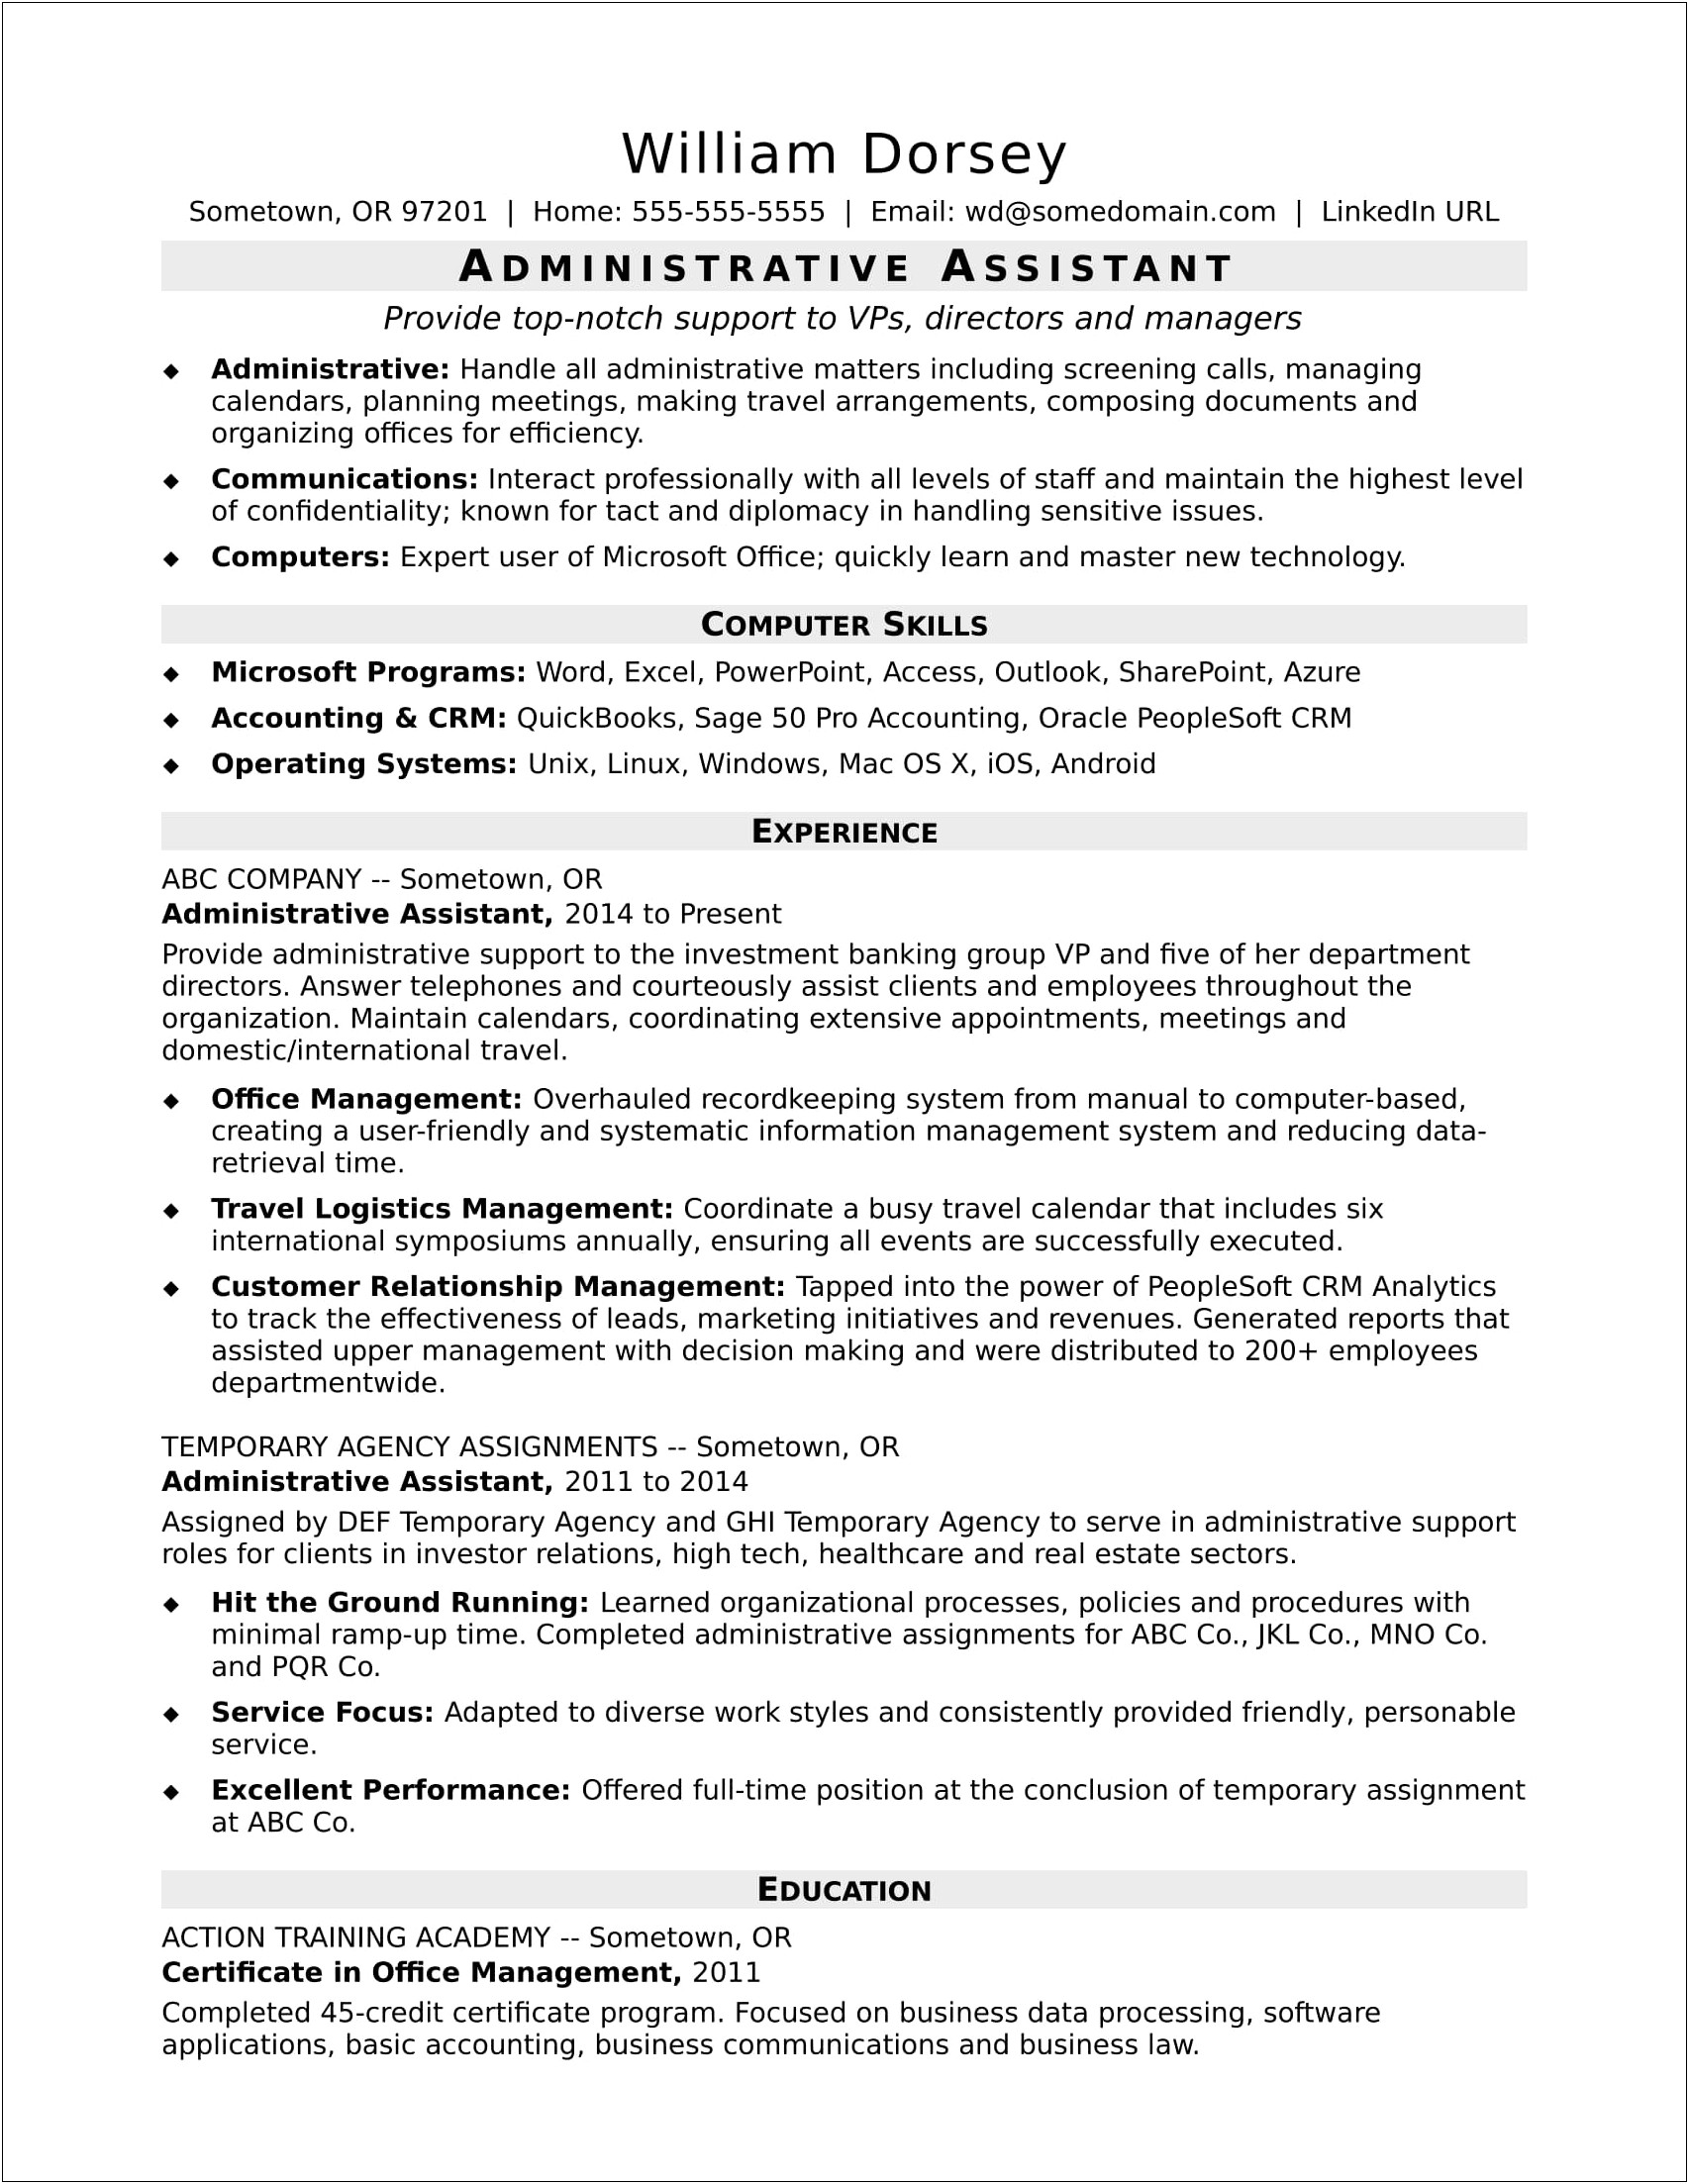 Skills To List On Resume For Office Assistant